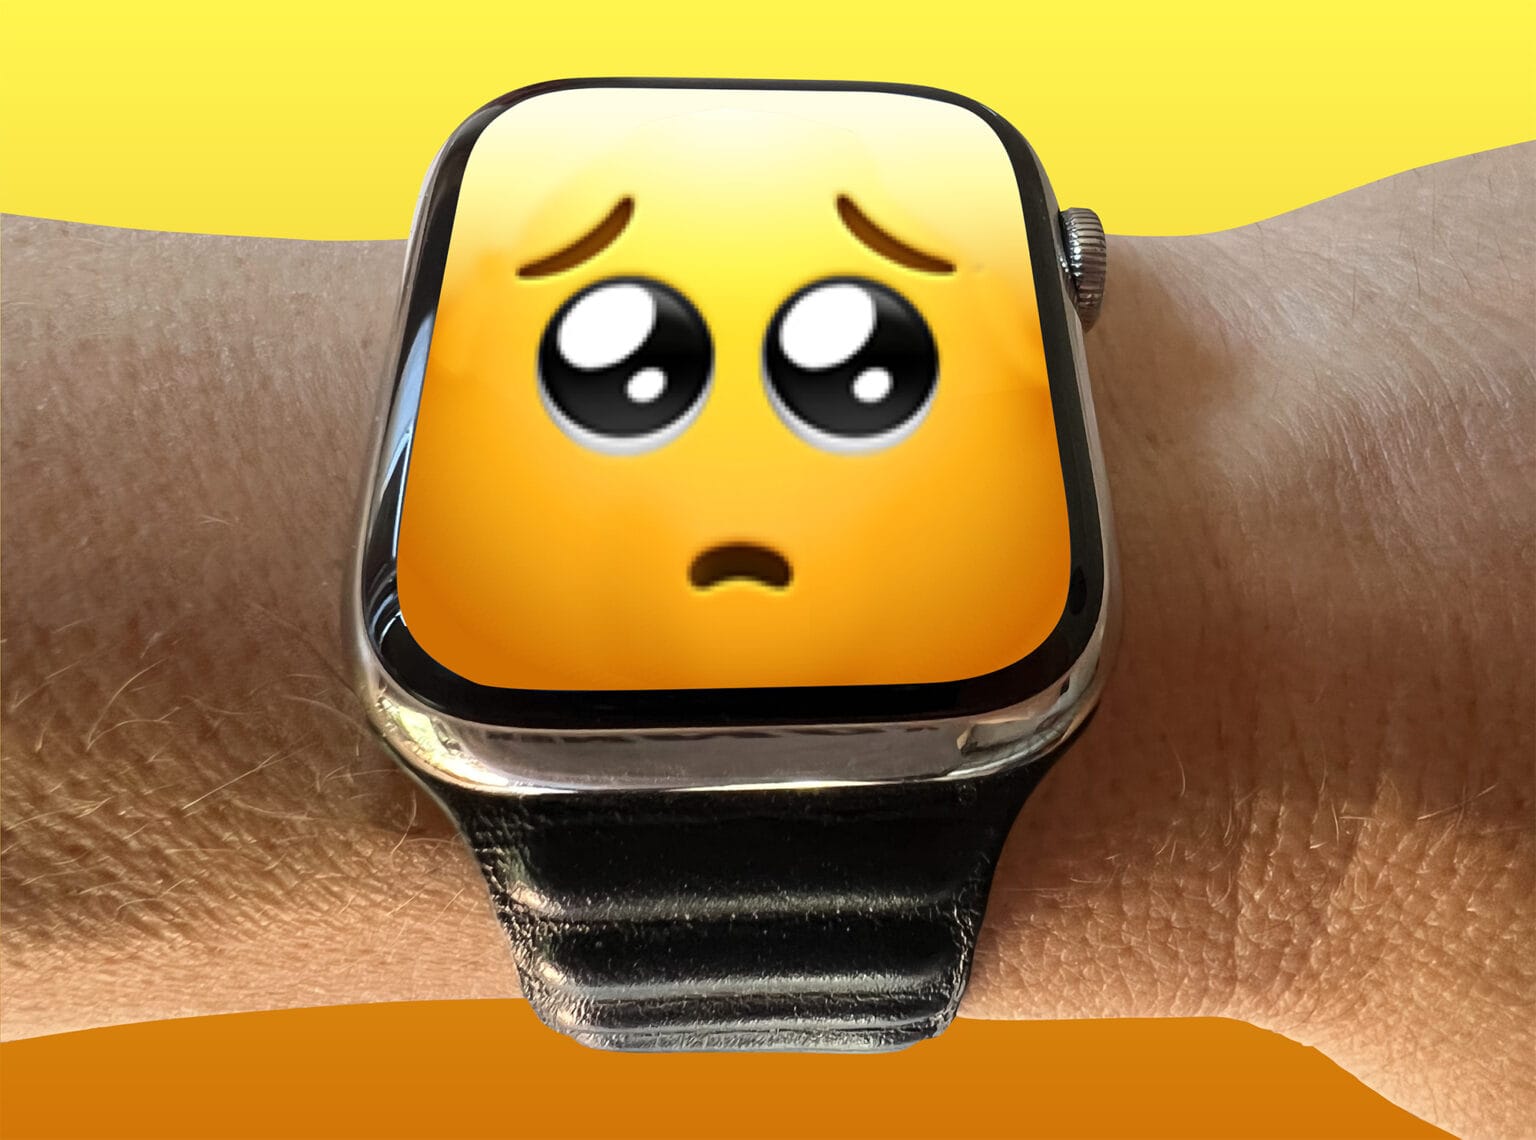 Have you been too hard on Apple Watch Series 7?